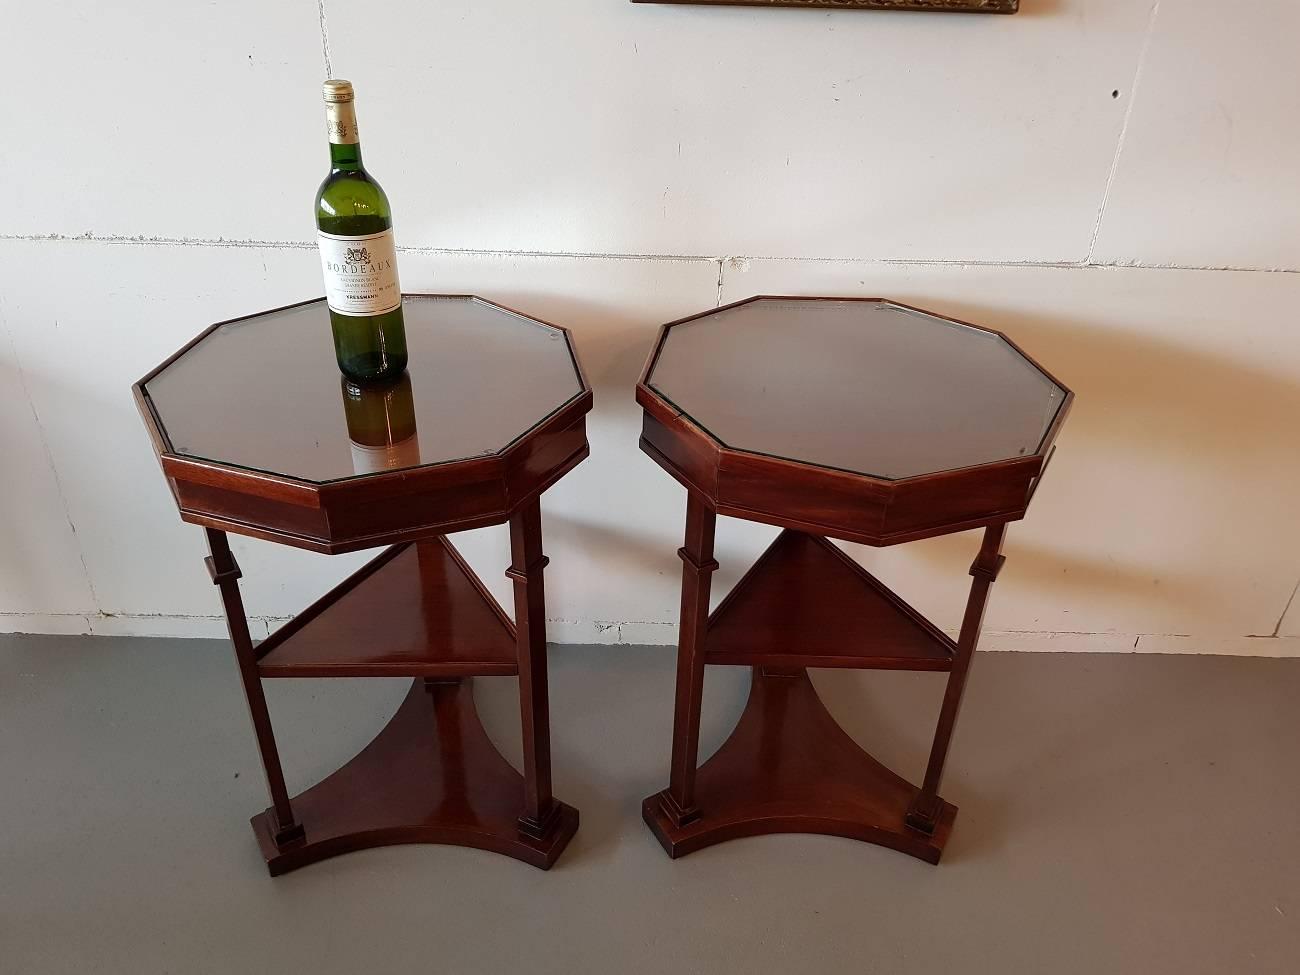 Set of two identical French nonagon shaped mahogany side tables in a classic design both with a glass plate and drawer. They were made at the end of the 20th century and wear consistent by age and use.

The measurements are,
Depth 49 cm/ 19.2